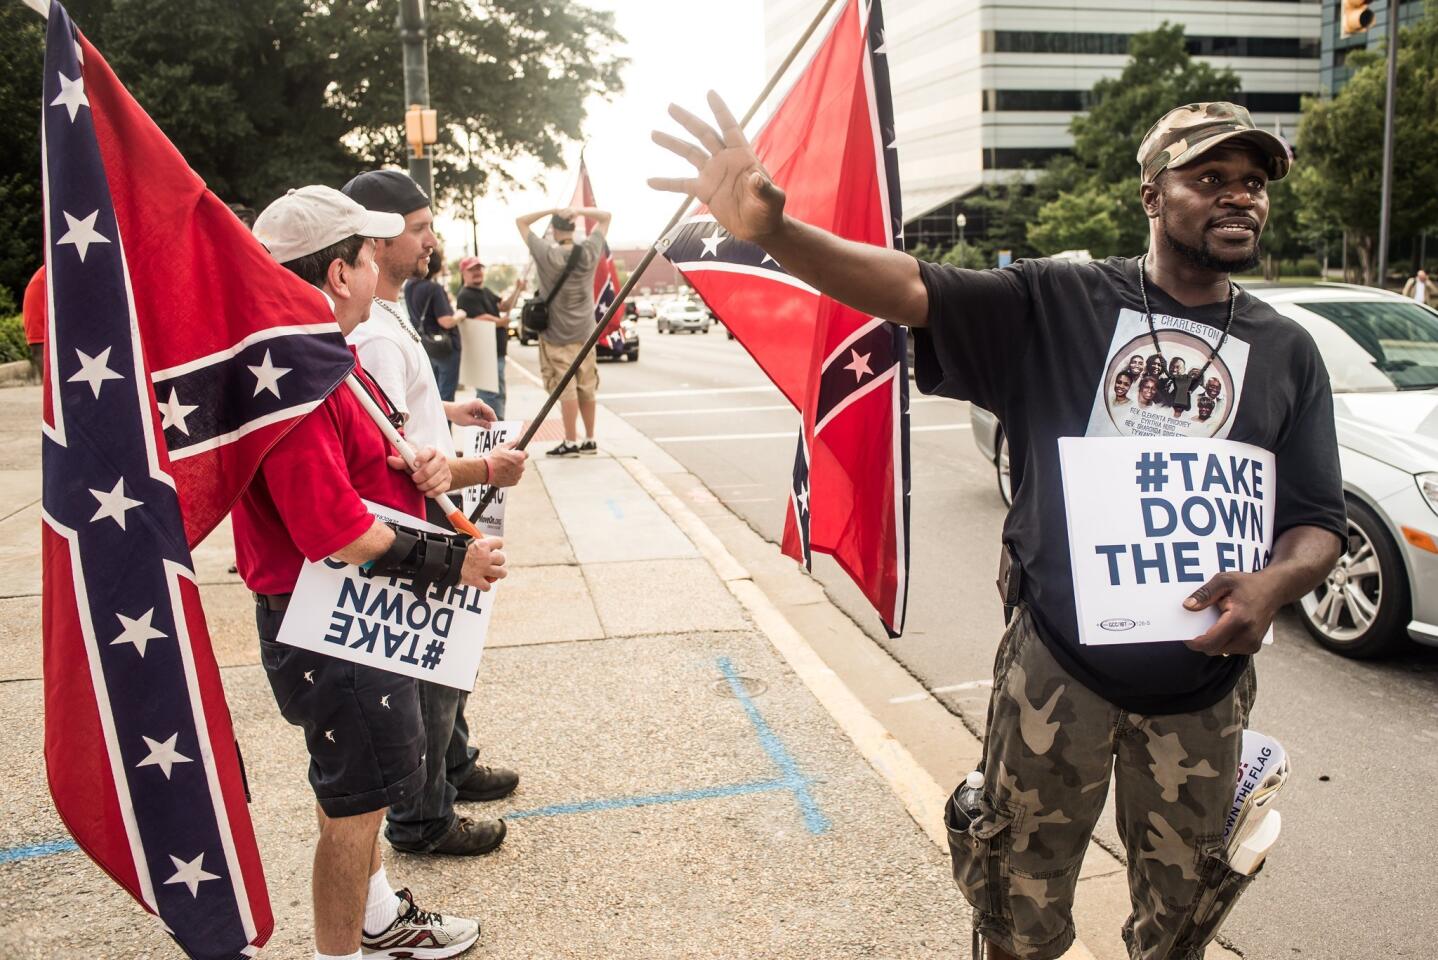 Calvin Bennett, right, talks with Confederate flag supporters outside the Statehouse in Columbia, S.C.